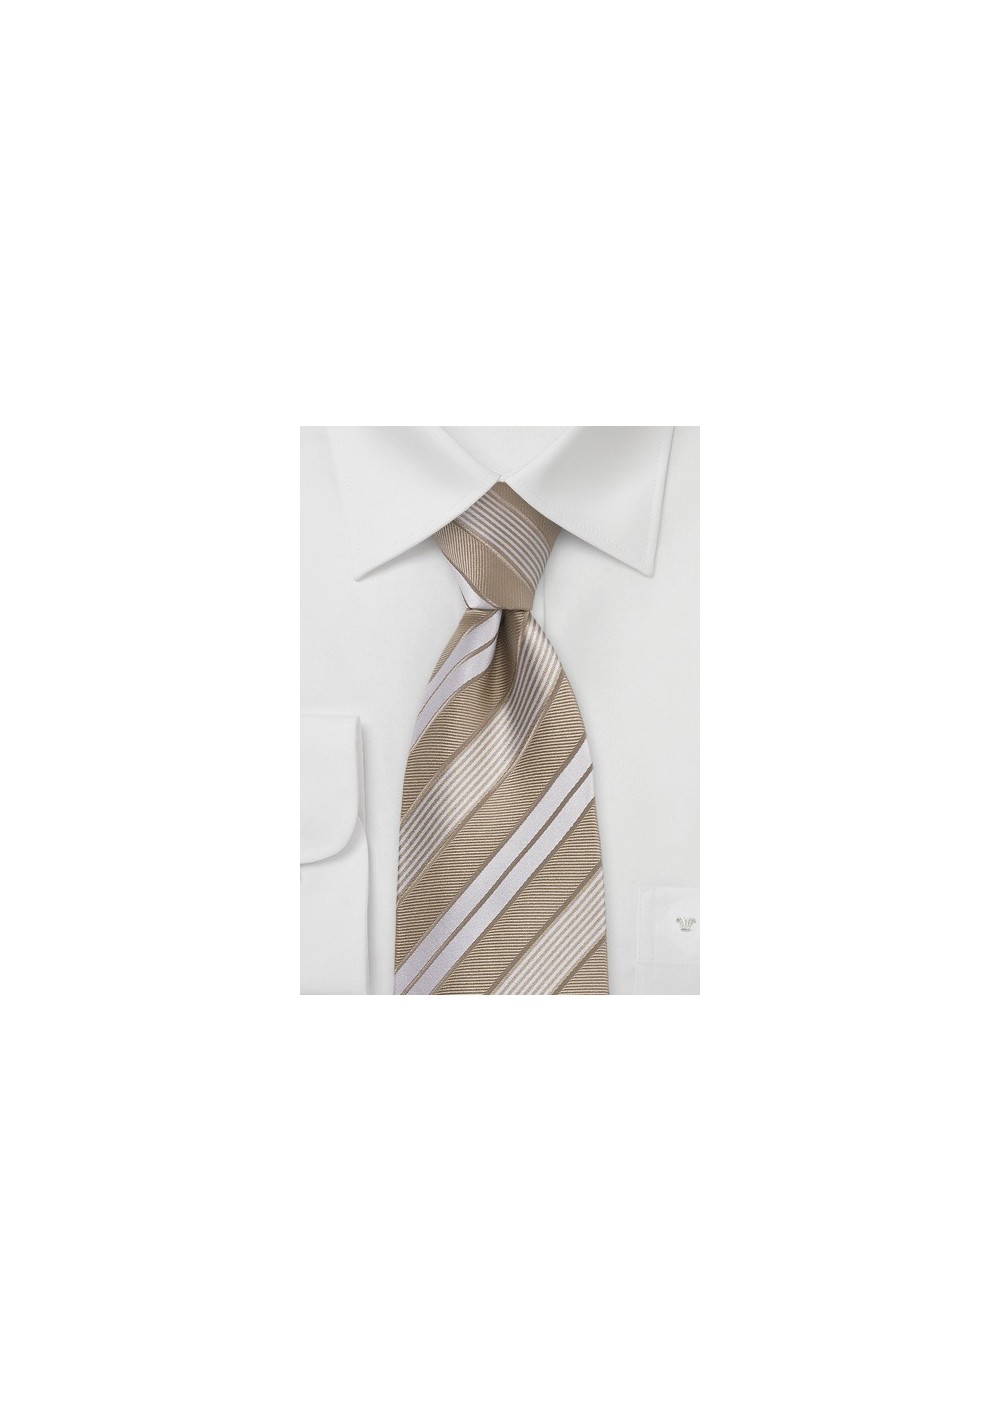 Caramel and Tan Striped Tie